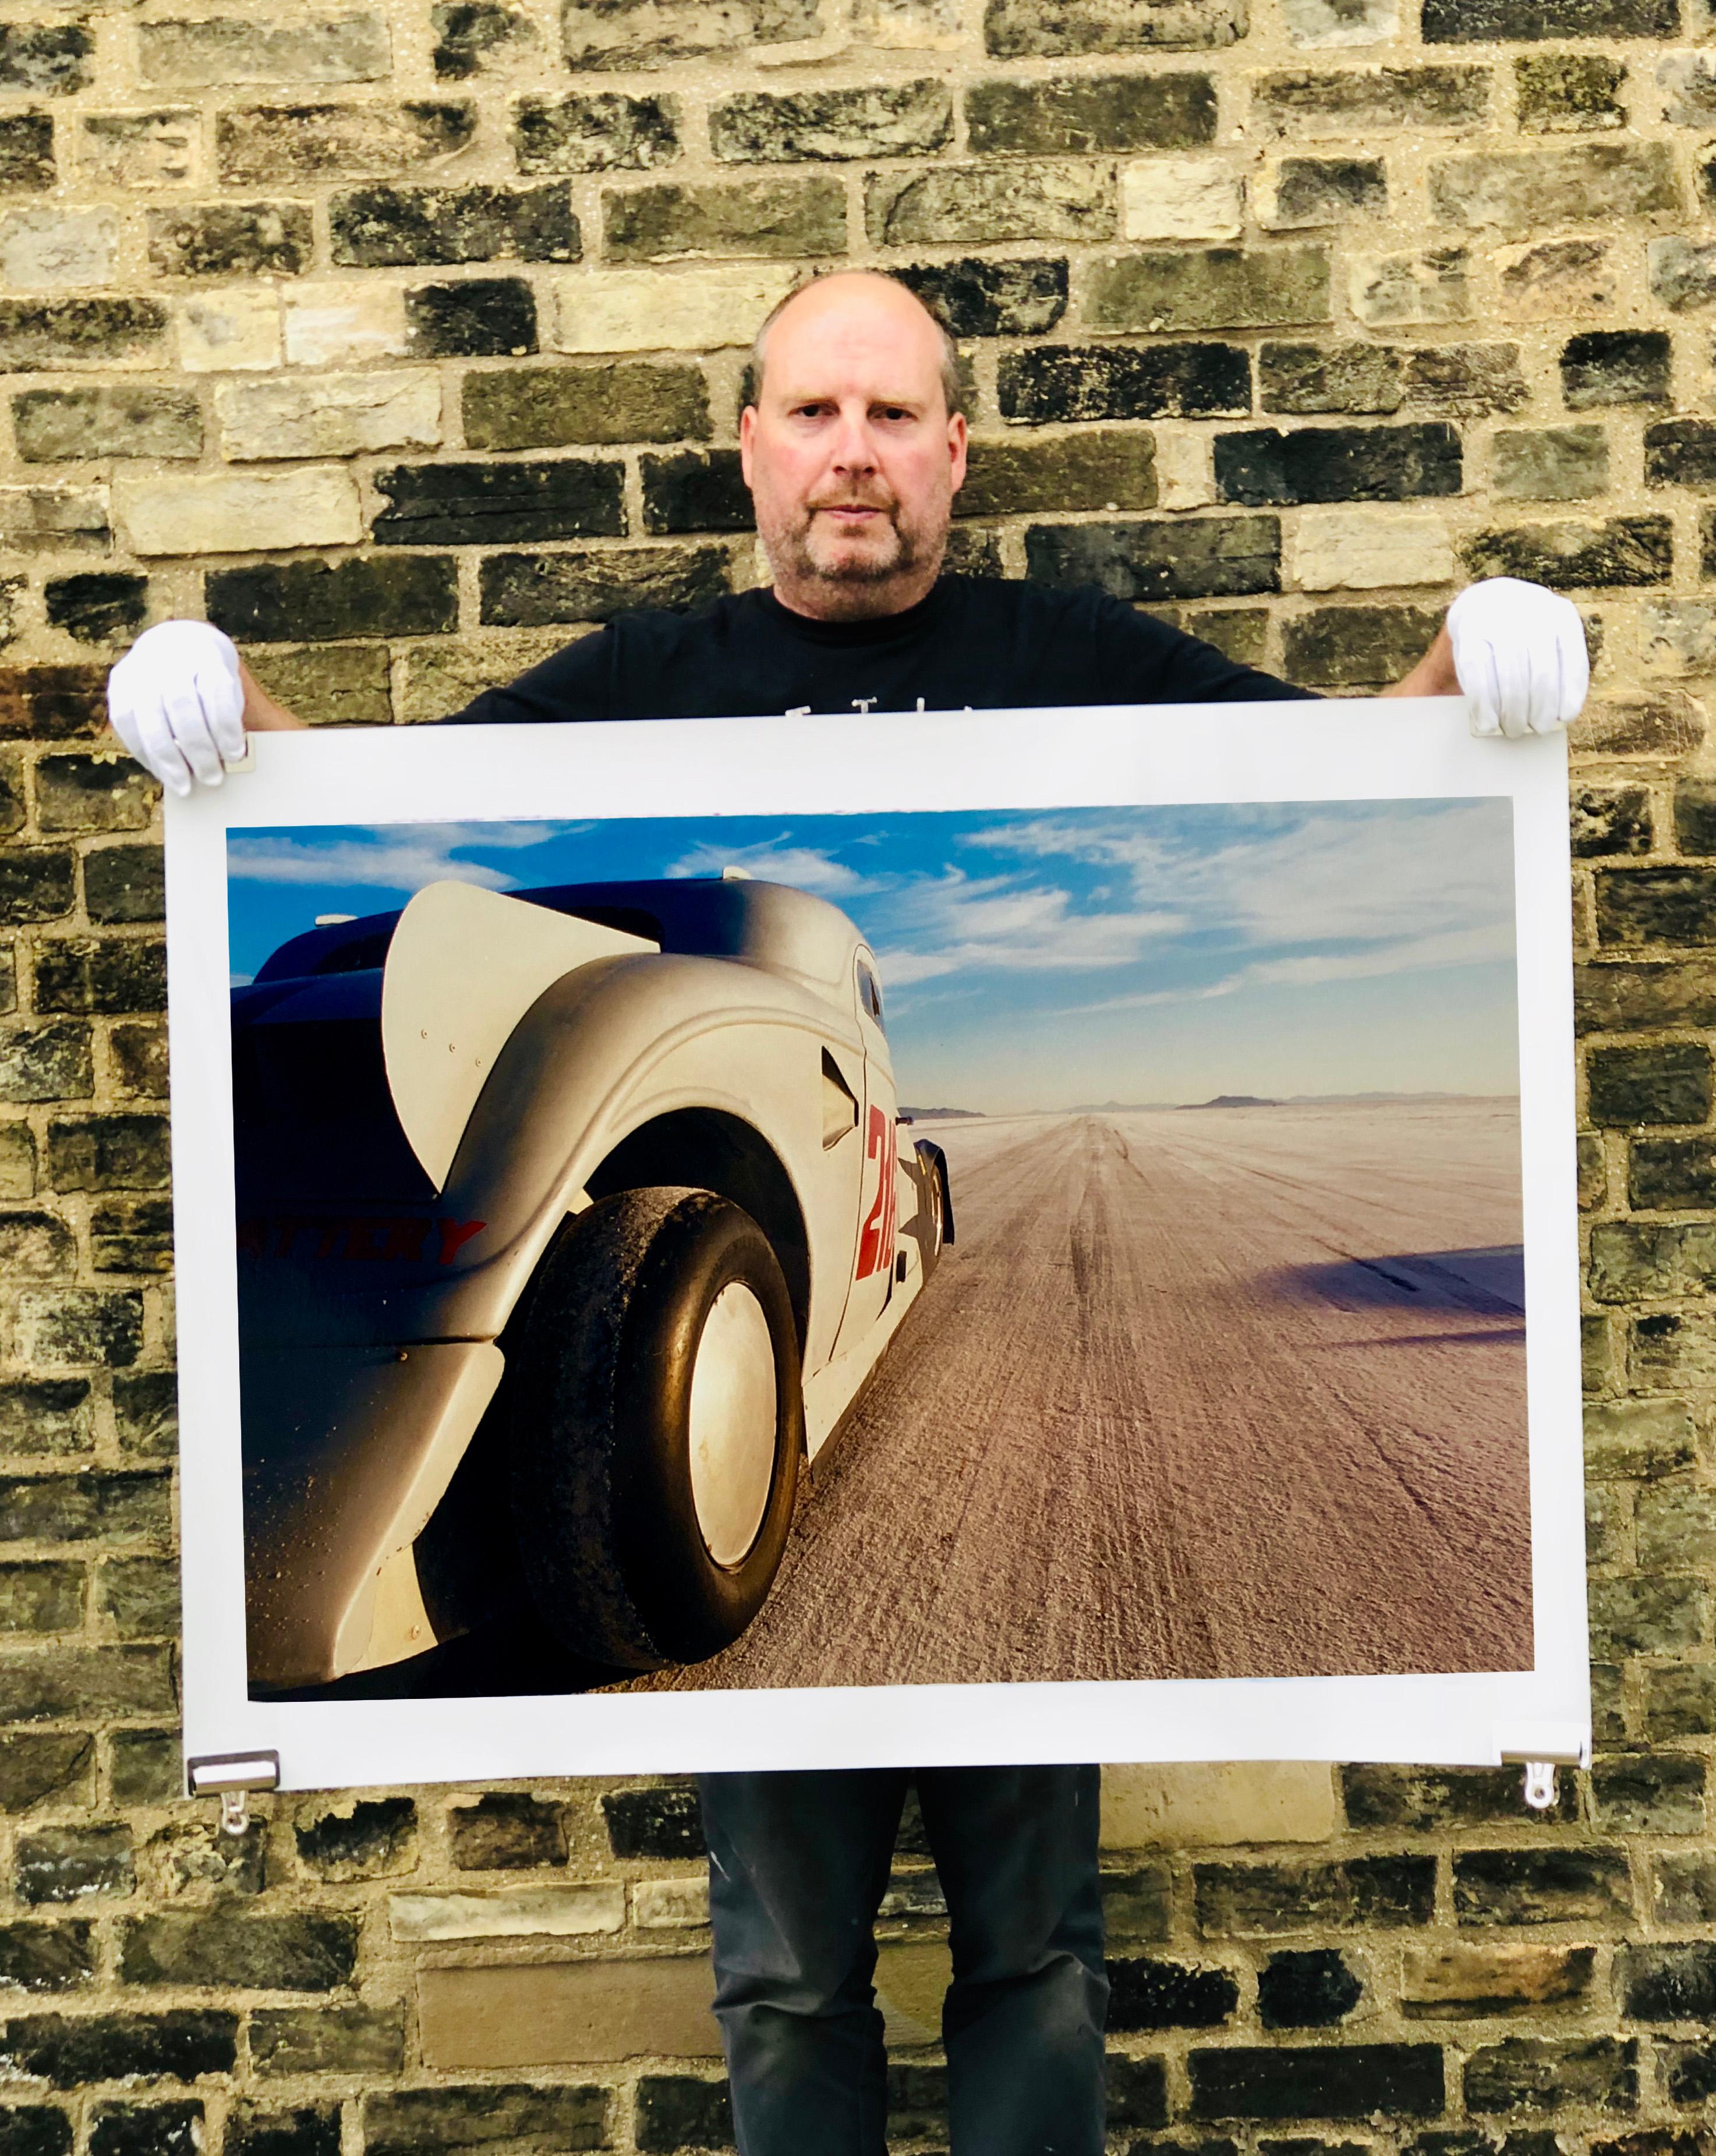 Captured in the iconic home of speed, Bonneville Salt Flats, the powerful iconic Ford Coupe Land Speed Racing Car sits in the foreground of the powerful expansive landscape.

This artwork is a limited edition of 25, gloss photographic print.